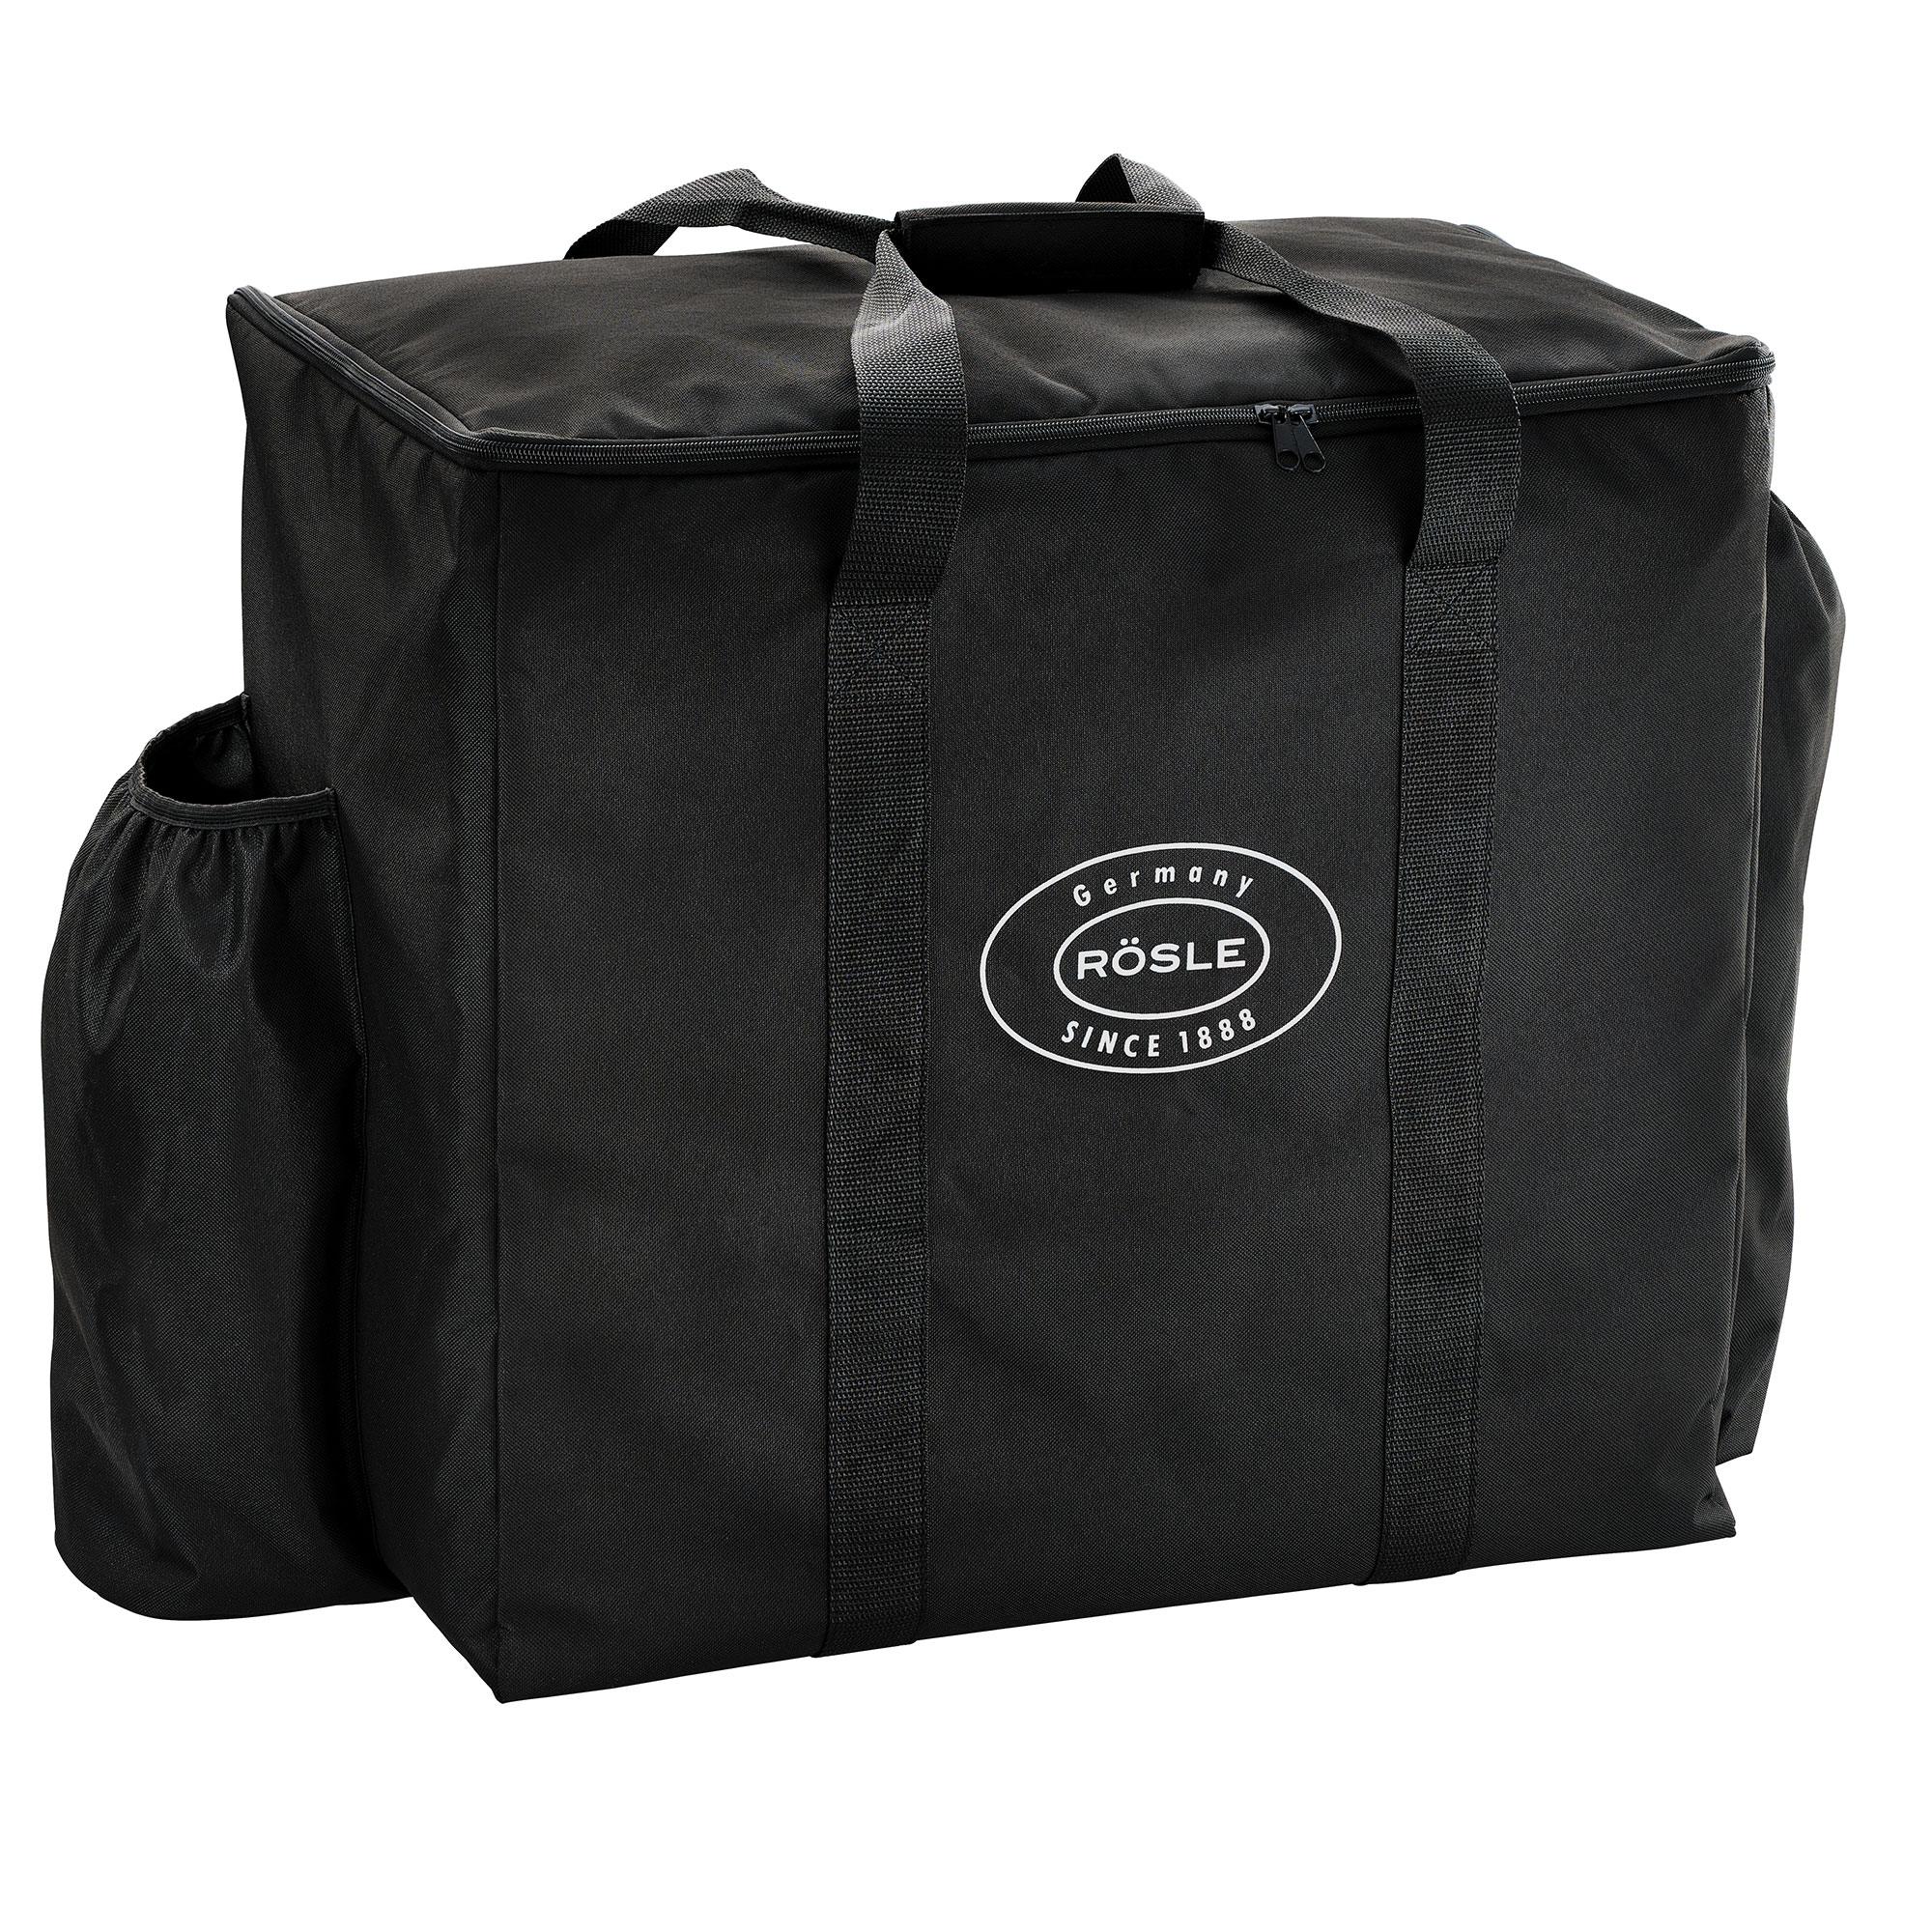 Carrying Bag for BBQ-Portable VIDERO G2-P